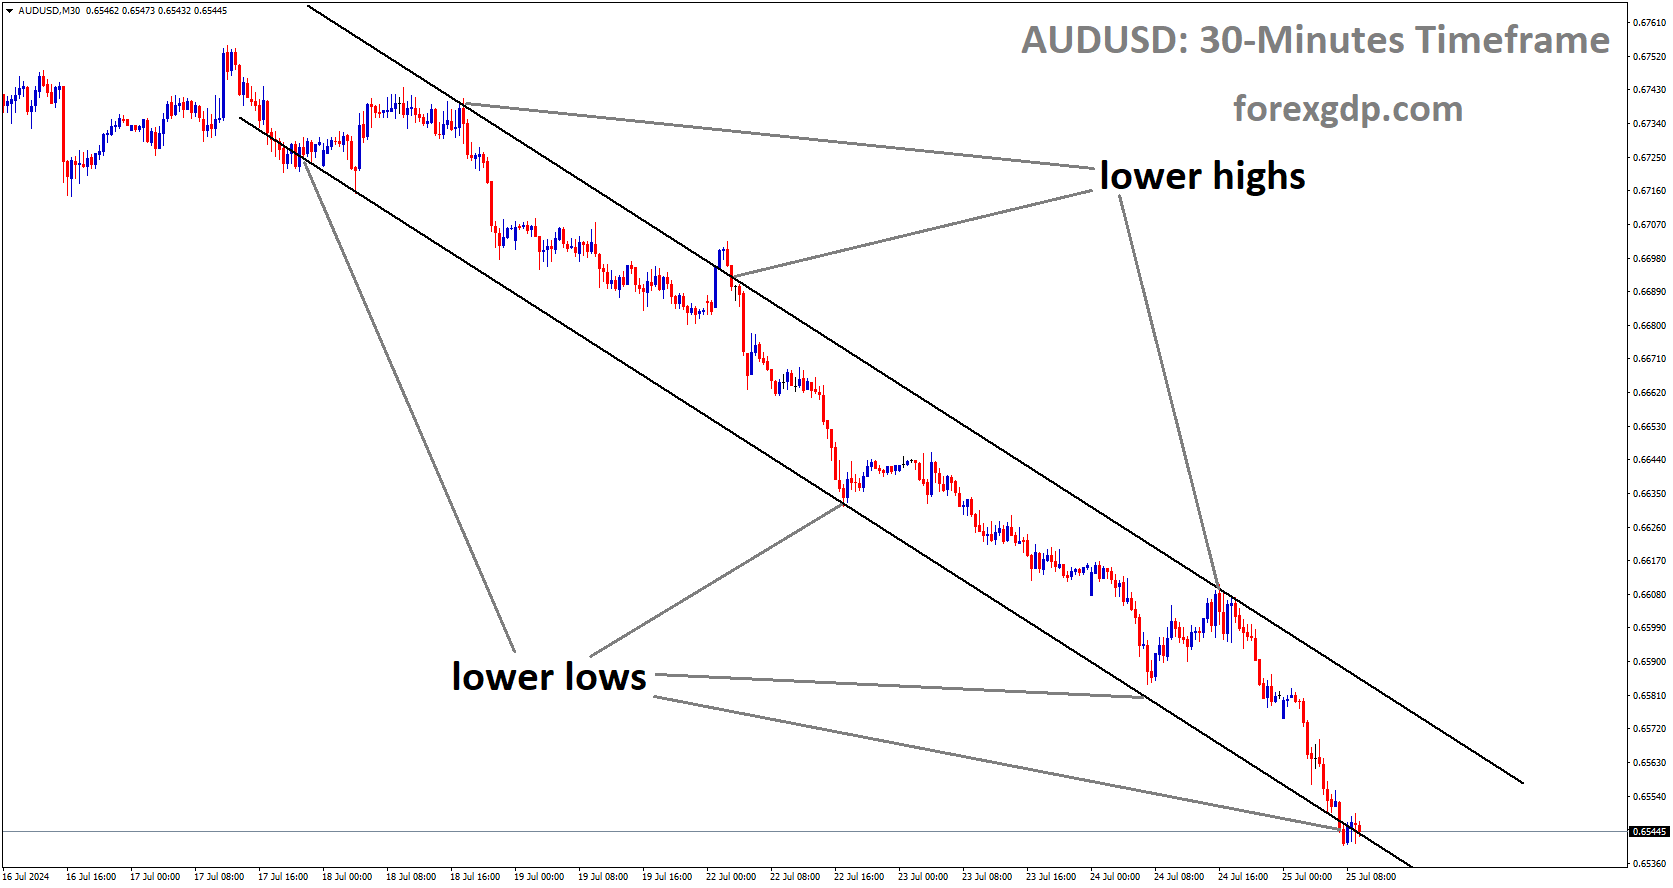 AUDUSD is moving in Descending channel and market has reached lower low area of the channel